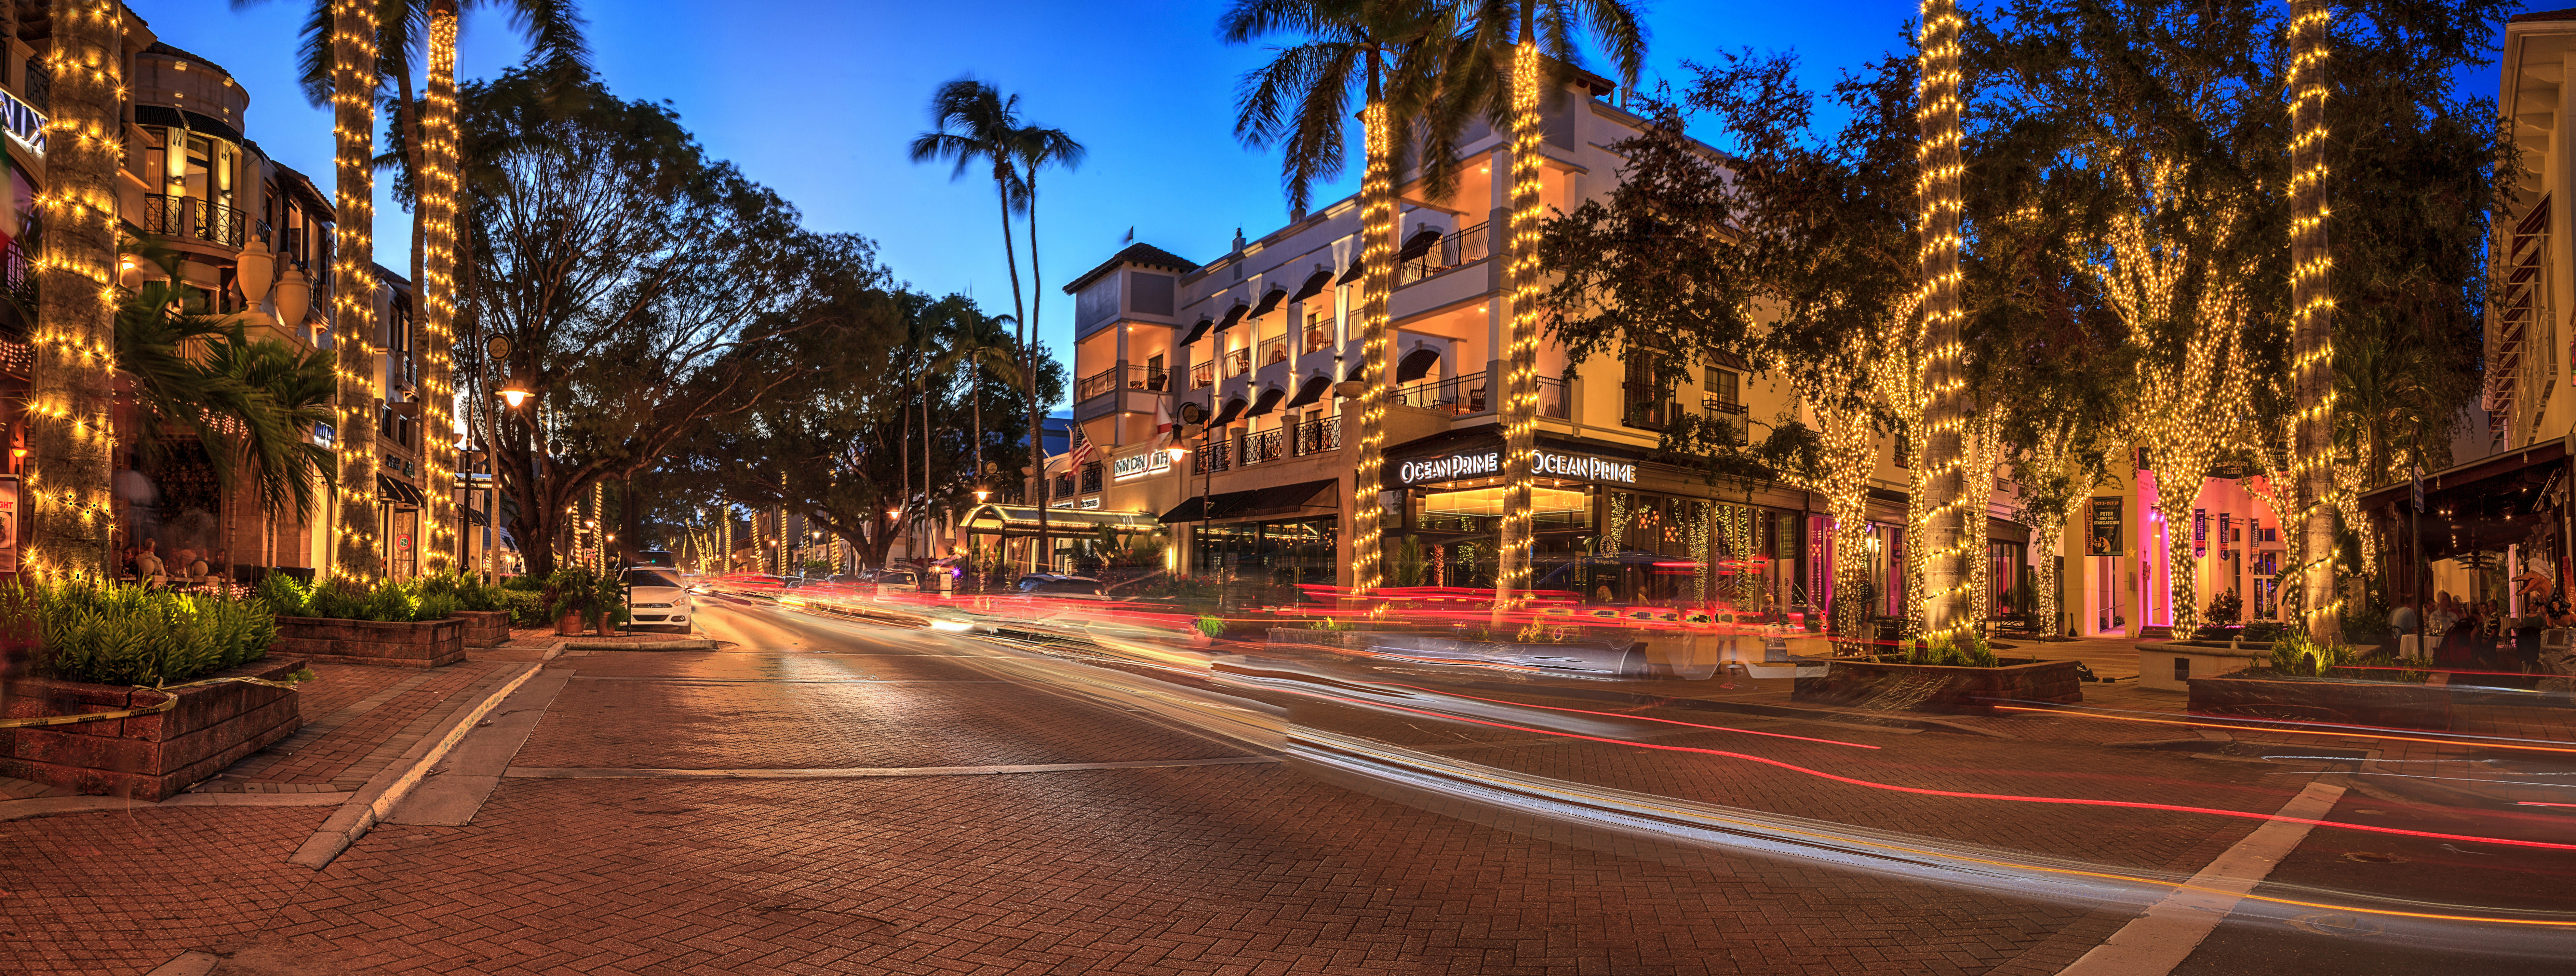 An upscale neighborhood at sunset with palm trees and tony shops.